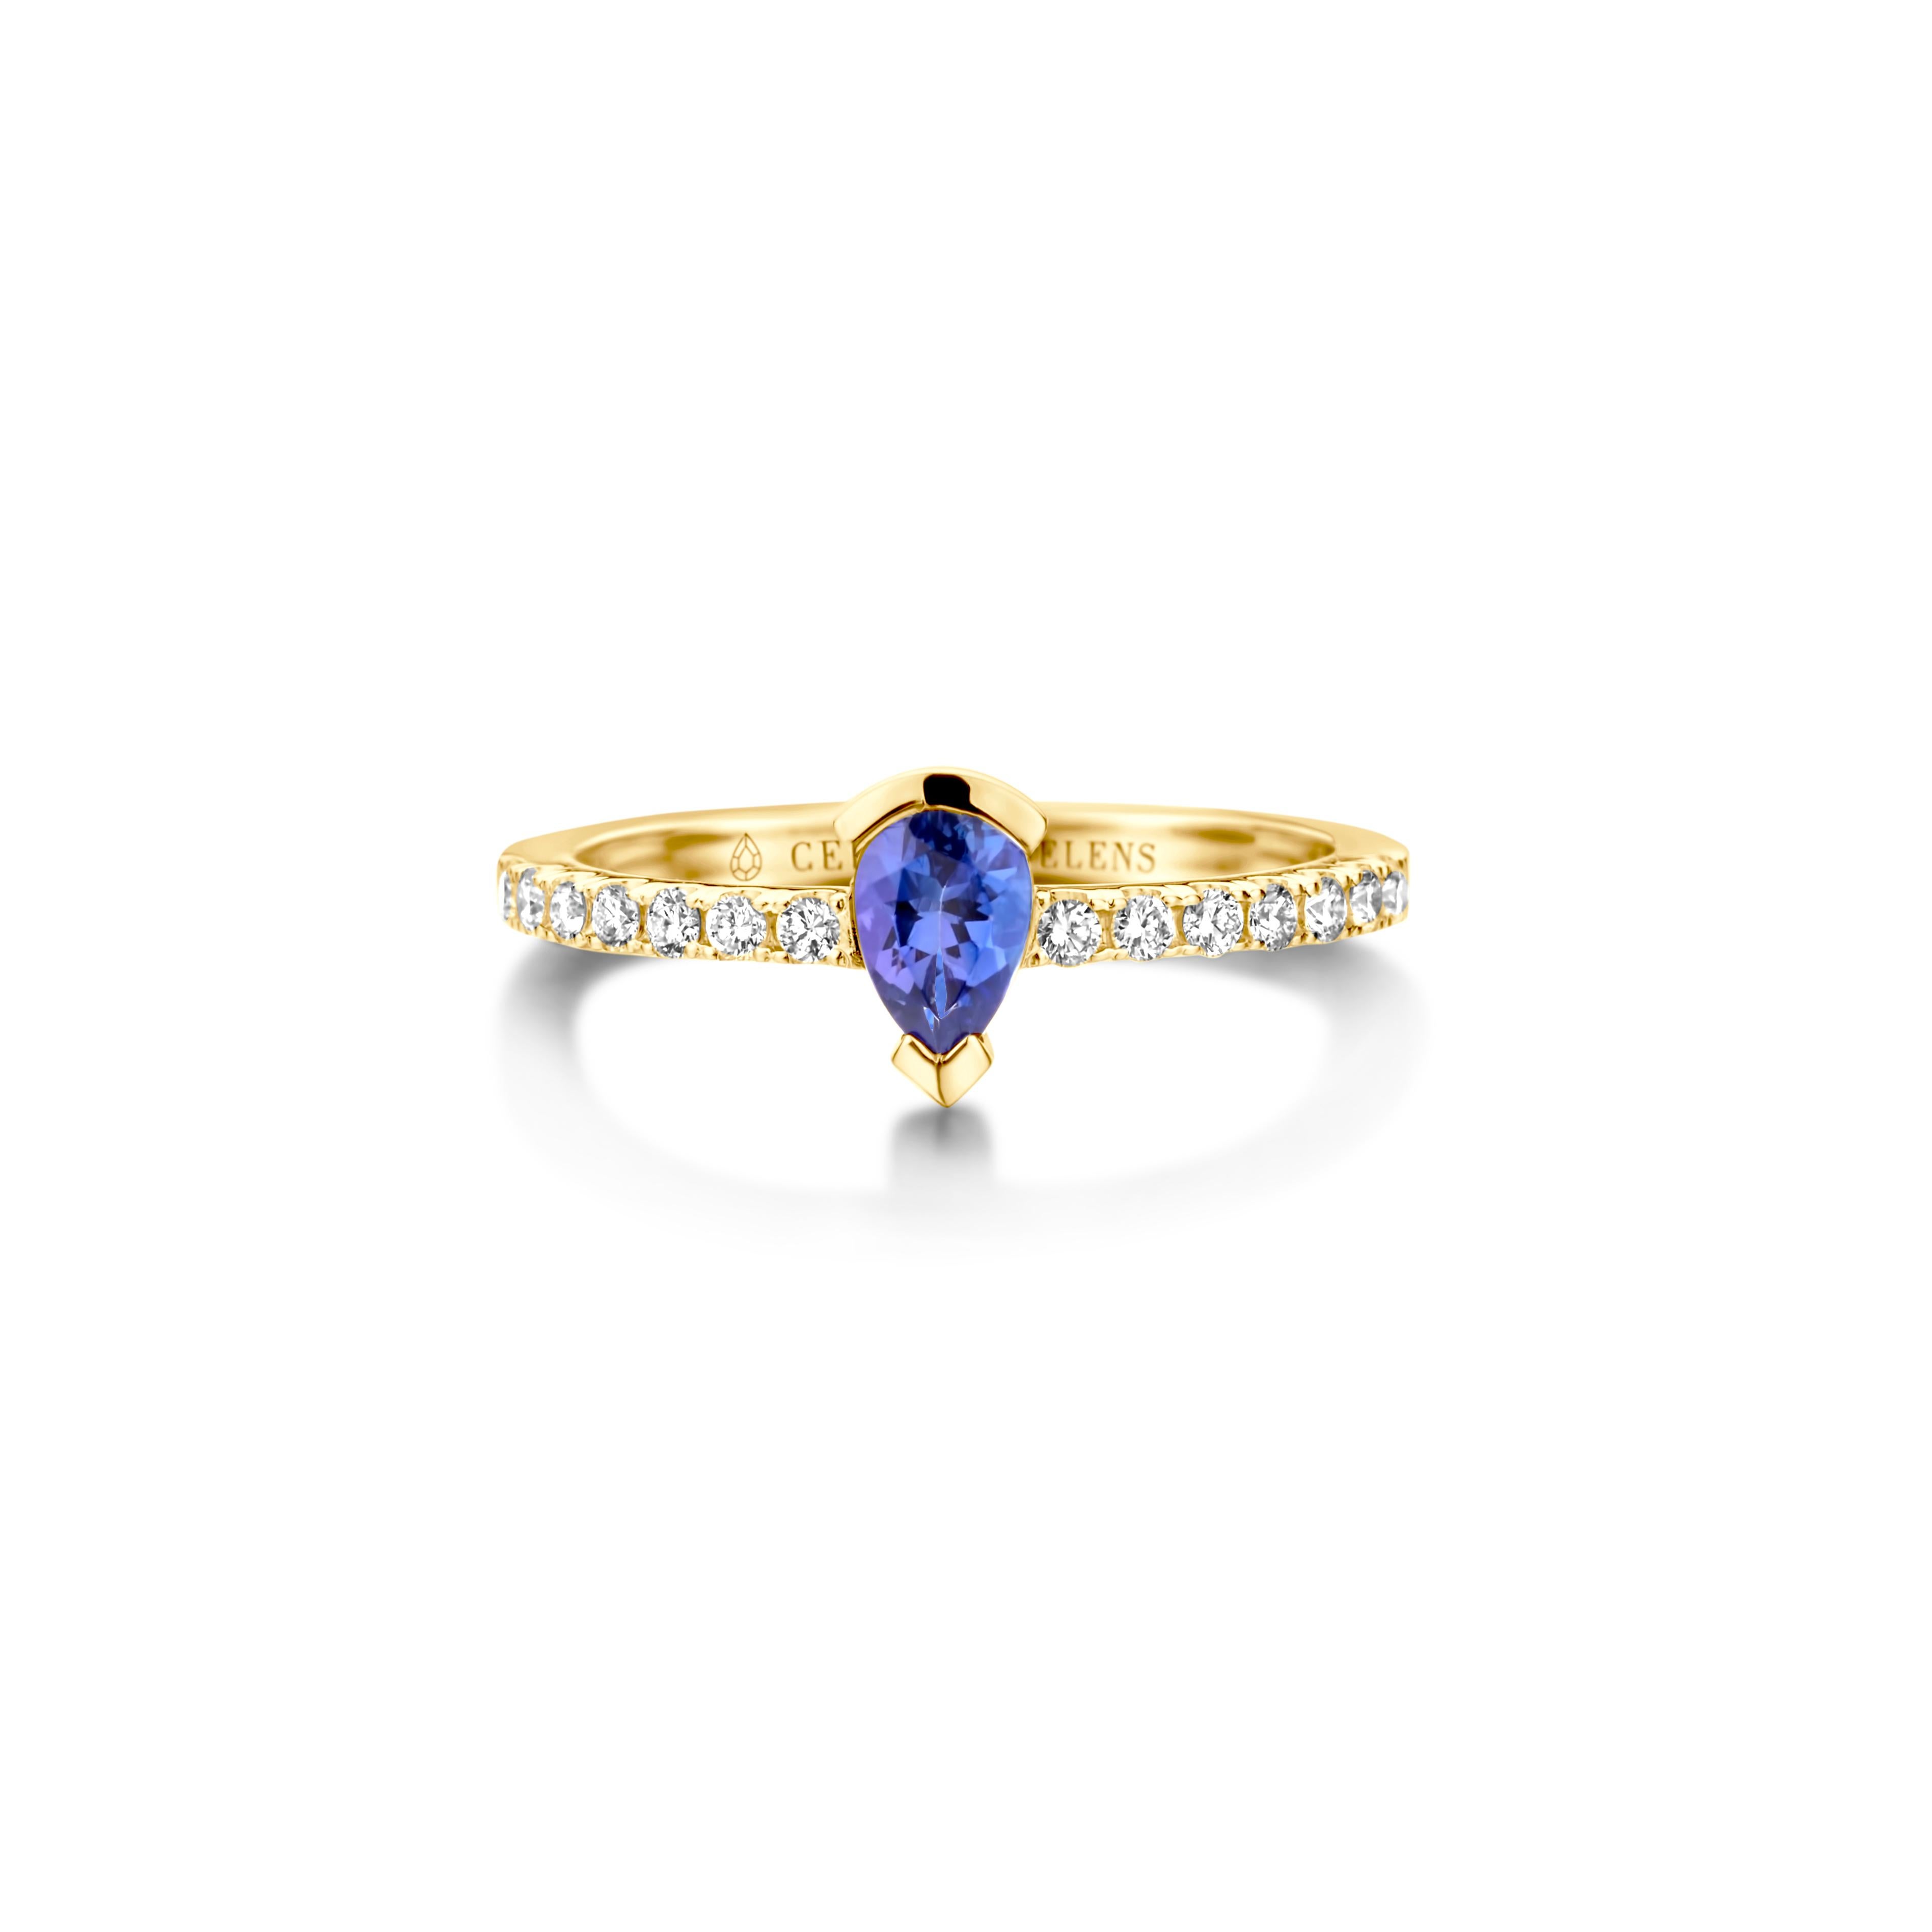 Adeline Straight ring in 18Kt white gold set with a pear-shaped tanzanite and 0,24 Ct of white brilliant cut diamonds - VS F quality. Also, available in yellow gold and white gold. Celine Roelens, a goldsmith and gemologist, is specialized in